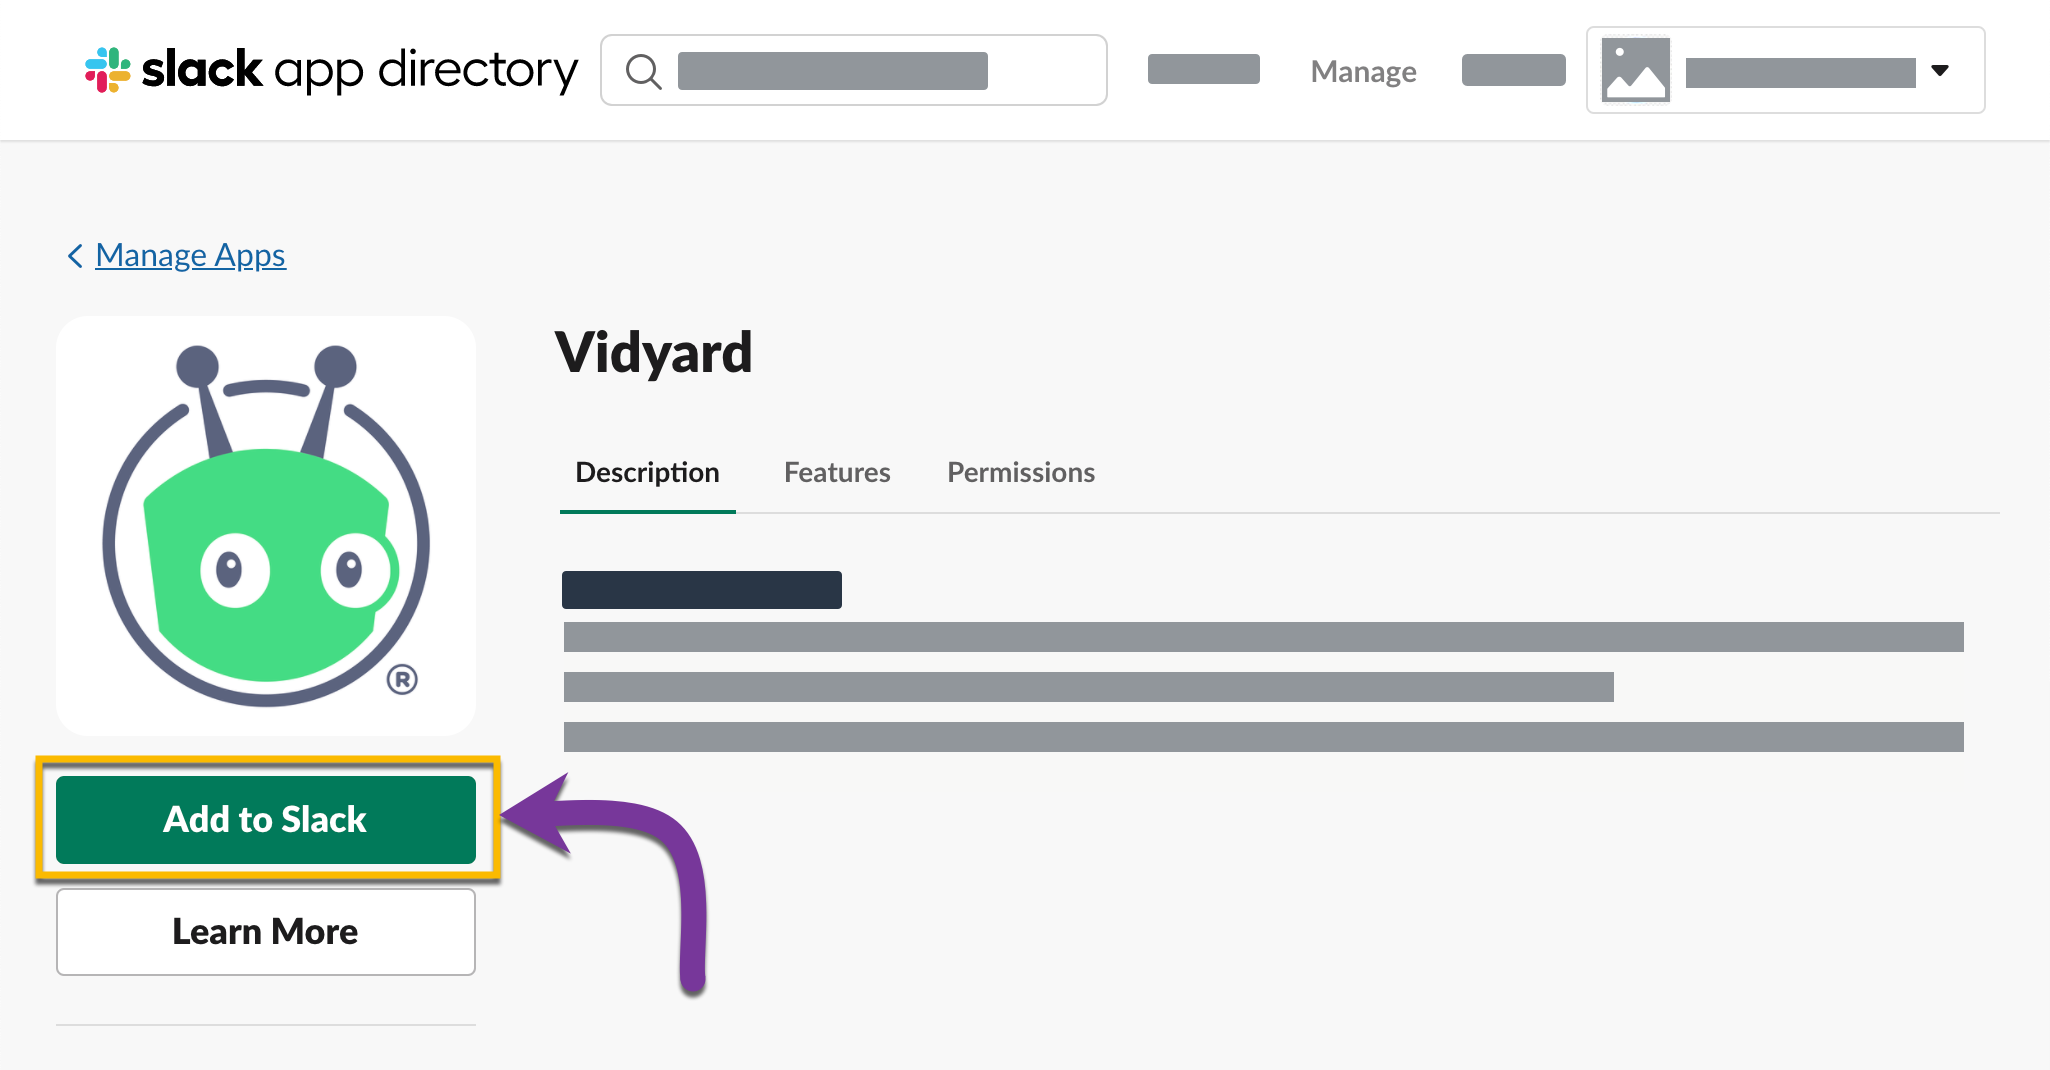 Adding the Vidyard app to your workspace from the Slack App Directory